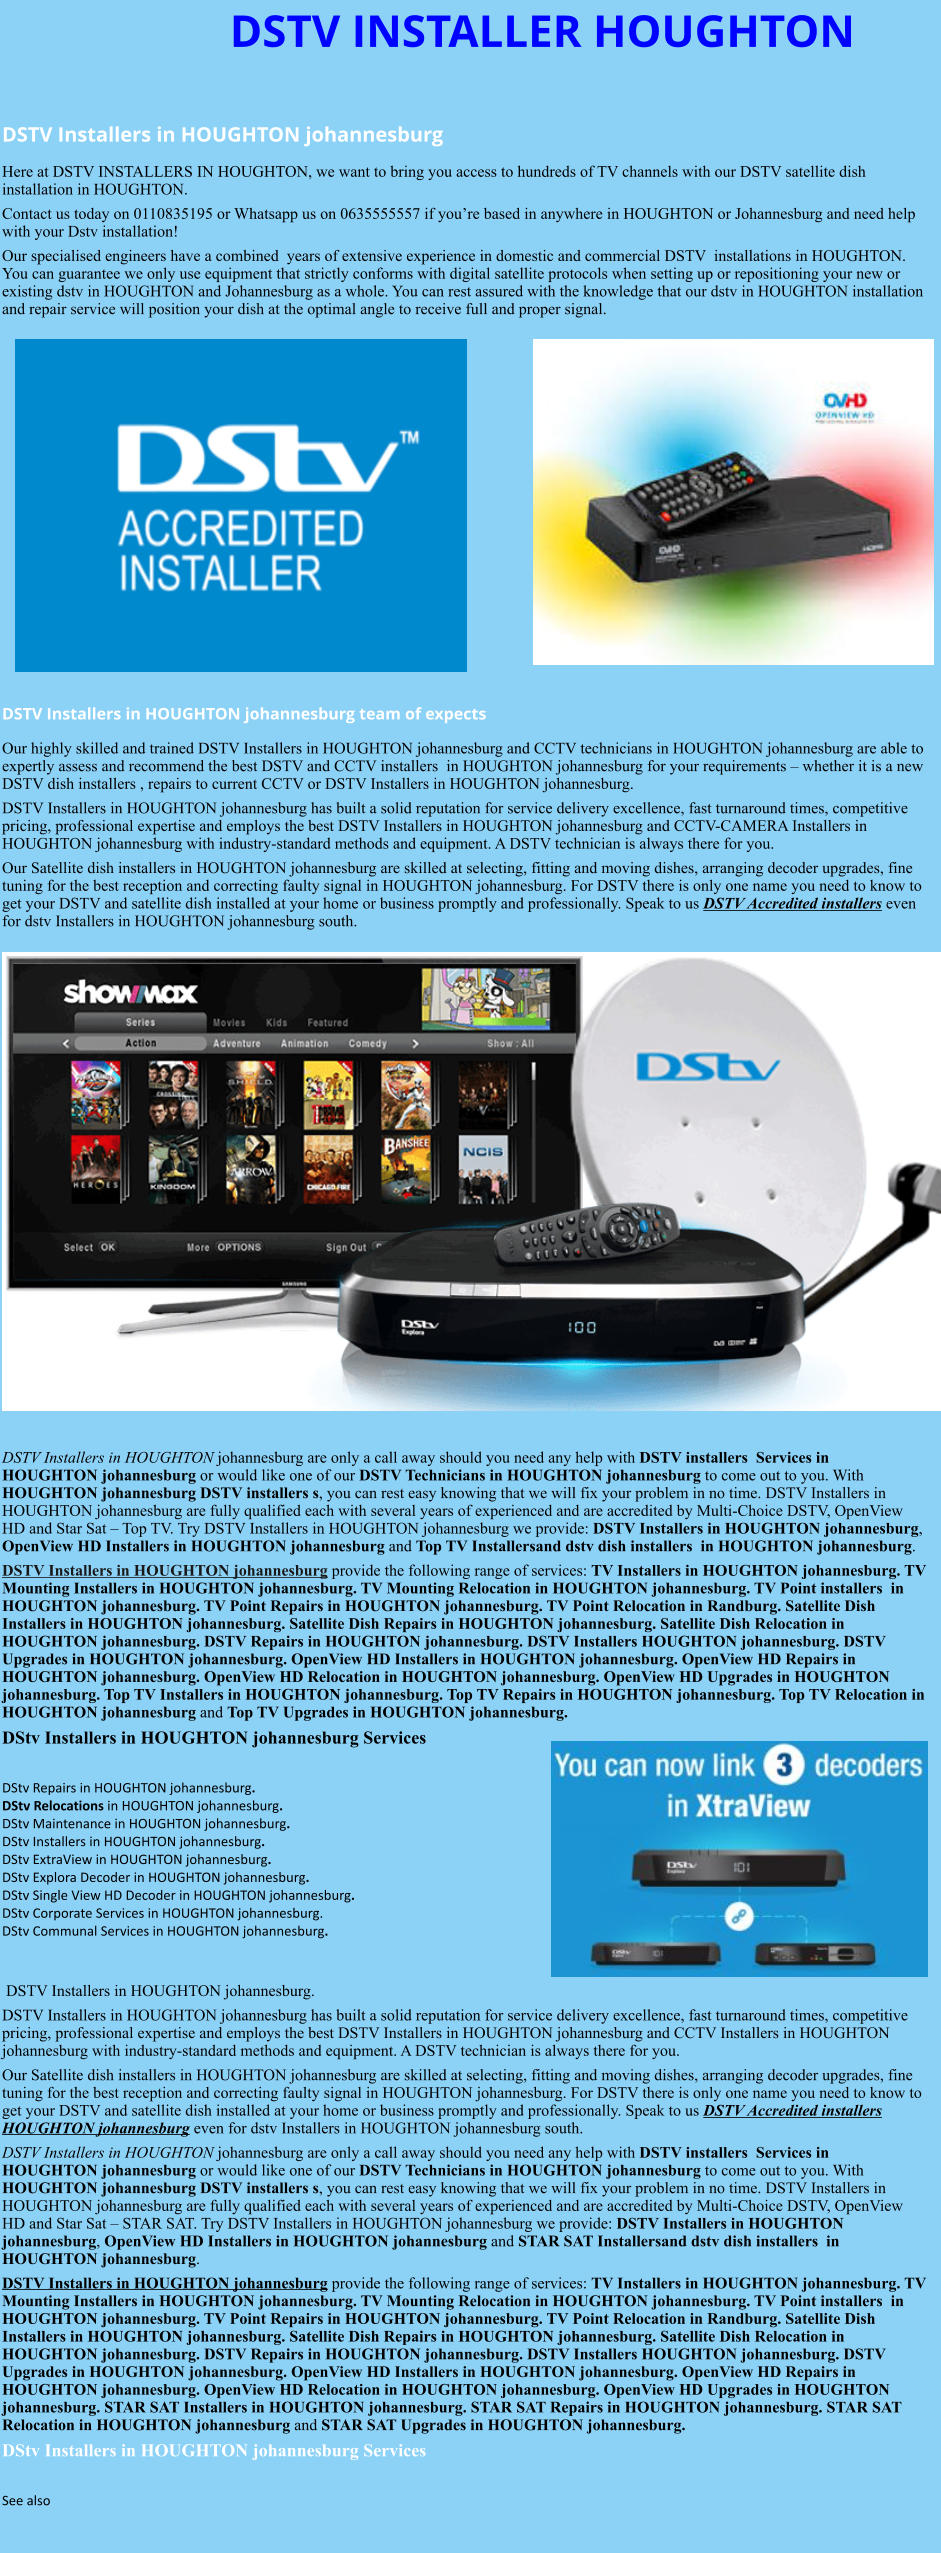 DSTV INSTALLER HOUGHTON  DSTV Installers in HOUGHTON johannesburg  Here at DSTV INSTALLERS IN HOUGHTON, we want to bring you access to hundreds of TV channels with our DSTV satellite dish installation in HOUGHTON. Contact us today on 0110835195 or Whatsapp us on 0635555557 if you’re based in anywhere in HOUGHTON or Johannesburg and need help with your Dstv installation! Our specialised engineers have a combined  years of extensive experience in domestic and commercial DSTV  installations in HOUGHTON. You can guarantee we only use equipment that strictly conforms with digital satellite protocols when setting up or repositioning your new or existing dstv in HOUGHTON and Johannesburg as a whole. You can rest assured with the knowledge that our dstv in HOUGHTON installation and repair service will position your dish at the optimal angle to receive full and proper signal.                DSTV Installers in HOUGHTON johannesburg team of expects Our highly skilled and trained DSTV Installers in HOUGHTON johannesburg and CCTV technicians in HOUGHTON johannesburg are able to expertly assess and recommend the best DSTV and CCTV installers  in HOUGHTON johannesburg for your requirements – whether it is a new DSTV dish installers , repairs to current CCTV or DSTV Installers in HOUGHTON johannesburg. DSTV Installers in HOUGHTON johannesburg has built a solid reputation for service delivery excellence, fast turnaround times, competitive pricing, professional expertise and employs the best DSTV Installers in HOUGHTON johannesburg and CCTV-CAMERA Installers in HOUGHTON johannesburg with industry-standard methods and equipment. A DSTV technician is always there for you. Our Satellite dish installers in HOUGHTON johannesburg are skilled at selecting, fitting and moving dishes, arranging decoder upgrades, fine tuning for the best reception and correcting faulty signal in HOUGHTON johannesburg. For DSTV there is only one name you need to know to get your DSTV and satellite dish installed at your home or business promptly and professionally. Speak to us DSTV Accredited installers even for dstv Installers in HOUGHTON johannesburg south.                      DSTV Installers in HOUGHTON johannesburg are only a call away should you need any help with DSTV installers  Services in HOUGHTON johannesburg or would like one of our DSTV Technicians in HOUGHTON johannesburg to come out to you. With HOUGHTON johannesburg DSTV installers s, you can rest easy knowing that we will fix your problem in no time. DSTV Installers in HOUGHTON johannesburg are fully qualified each with several years of experienced and are accredited by Multi-Choice DSTV, OpenView HD and Star Sat – Top TV. Try DSTV Installers in HOUGHTON johannesburg we provide: DSTV Installers in HOUGHTON johannesburg, OpenView HD Installers in HOUGHTON johannesburg and Top TV Installersand dstv dish installers  in HOUGHTON johannesburg. DSTV Installers in HOUGHTON johannesburg provide the following range of services: TV Installers in HOUGHTON johannesburg. TV Mounting Installers in HOUGHTON johannesburg. TV Mounting Relocation in HOUGHTON johannesburg. TV Point installers  in HOUGHTON johannesburg. TV Point Repairs in HOUGHTON johannesburg. TV Point Relocation in Randburg. Satellite Dish Installers in HOUGHTON johannesburg. Satellite Dish Repairs in HOUGHTON johannesburg. Satellite Dish Relocation in HOUGHTON johannesburg. DSTV Repairs in HOUGHTON johannesburg. DSTV Installers HOUGHTON johannesburg. DSTV Upgrades in HOUGHTON johannesburg. OpenView HD Installers in HOUGHTON johannesburg. OpenView HD Repairs in HOUGHTON johannesburg. OpenView HD Relocation in HOUGHTON johannesburg. OpenView HD Upgrades in HOUGHTON johannesburg. Top TV Installers in HOUGHTON johannesburg. Top TV Repairs in HOUGHTON johannesburg. Top TV Relocation in HOUGHTON johannesburg and Top TV Upgrades in HOUGHTON johannesburg. DStv Installers in HOUGHTON johannesburg Services  DStv Repairs in HOUGHTON johannesburg.  DStv Relocations in HOUGHTON johannesburg.  DStv Maintenance in HOUGHTON johannesburg. DStv Installers in HOUGHTON johannesburg. DStv ExtraView in HOUGHTON johannesburg. DStv Explora Decoder in HOUGHTON johannesburg. DStv Single View HD Decoder in HOUGHTON johannesburg. DStv Corporate Services in HOUGHTON johannesburg. DStv Communal Services in HOUGHTON johannesburg.    DSTV Installers in HOUGHTON johannesburg. DSTV Installers in HOUGHTON johannesburg has built a solid reputation for service delivery excellence, fast turnaround times, competitive pricing, professional expertise and employs the best DSTV Installers in HOUGHTON johannesburg and CCTV Installers in HOUGHTON johannesburg with industry-standard methods and equipment. A DSTV technician is always there for you. Our Satellite dish installers in HOUGHTON johannesburg are skilled at selecting, fitting and moving dishes, arranging decoder upgrades, fine tuning for the best reception and correcting faulty signal in HOUGHTON johannesburg. For DSTV there is only one name you need to know to get your DSTV and satellite dish installed at your home or business promptly and professionally. Speak to us DSTV Accredited installers HOUGHTON johannesburg even for dstv Installers in HOUGHTON johannesburg south. DSTV Installers in HOUGHTON johannesburg are only a call away should you need any help with DSTV installers  Services in HOUGHTON johannesburg or would like one of our DSTV Technicians in HOUGHTON johannesburg to come out to you. With HOUGHTON johannesburg DSTV installers s, you can rest easy knowing that we will fix your problem in no time. DSTV Installers in HOUGHTON johannesburg are fully qualified each with several years of experienced and are accredited by Multi-Choice DSTV, OpenView HD and Star Sat – STAR SAT. Try DSTV Installers in HOUGHTON johannesburg we provide: DSTV Installers in HOUGHTON johannesburg, OpenView HD Installers in HOUGHTON johannesburg and STAR SAT Installersand dstv dish installers  in HOUGHTON johannesburg. DSTV Installers in HOUGHTON johannesburg provide the following range of services: TV Installers in HOUGHTON johannesburg. TV Mounting Installers in HOUGHTON johannesburg. TV Mounting Relocation in HOUGHTON johannesburg. TV Point installers  in HOUGHTON johannesburg. TV Point Repairs in HOUGHTON johannesburg. TV Point Relocation in Randburg. Satellite Dish Installers in HOUGHTON johannesburg. Satellite Dish Repairs in HOUGHTON johannesburg. Satellite Dish Relocation in HOUGHTON johannesburg. DSTV Repairs in HOUGHTON johannesburg. DSTV Installers HOUGHTON johannesburg. DSTV Upgrades in HOUGHTON johannesburg. OpenView HD Installers in HOUGHTON johannesburg. OpenView HD Repairs in HOUGHTON johannesburg. OpenView HD Relocation in HOUGHTON johannesburg. OpenView HD Upgrades in HOUGHTON johannesburg. STAR SAT Installers in HOUGHTON johannesburg. STAR SAT Repairs in HOUGHTON johannesburg. STAR SAT Relocation in HOUGHTON johannesburg and STAR SAT Upgrades in HOUGHTON johannesburg. DStv Installers in HOUGHTON johannesburg Services  See also